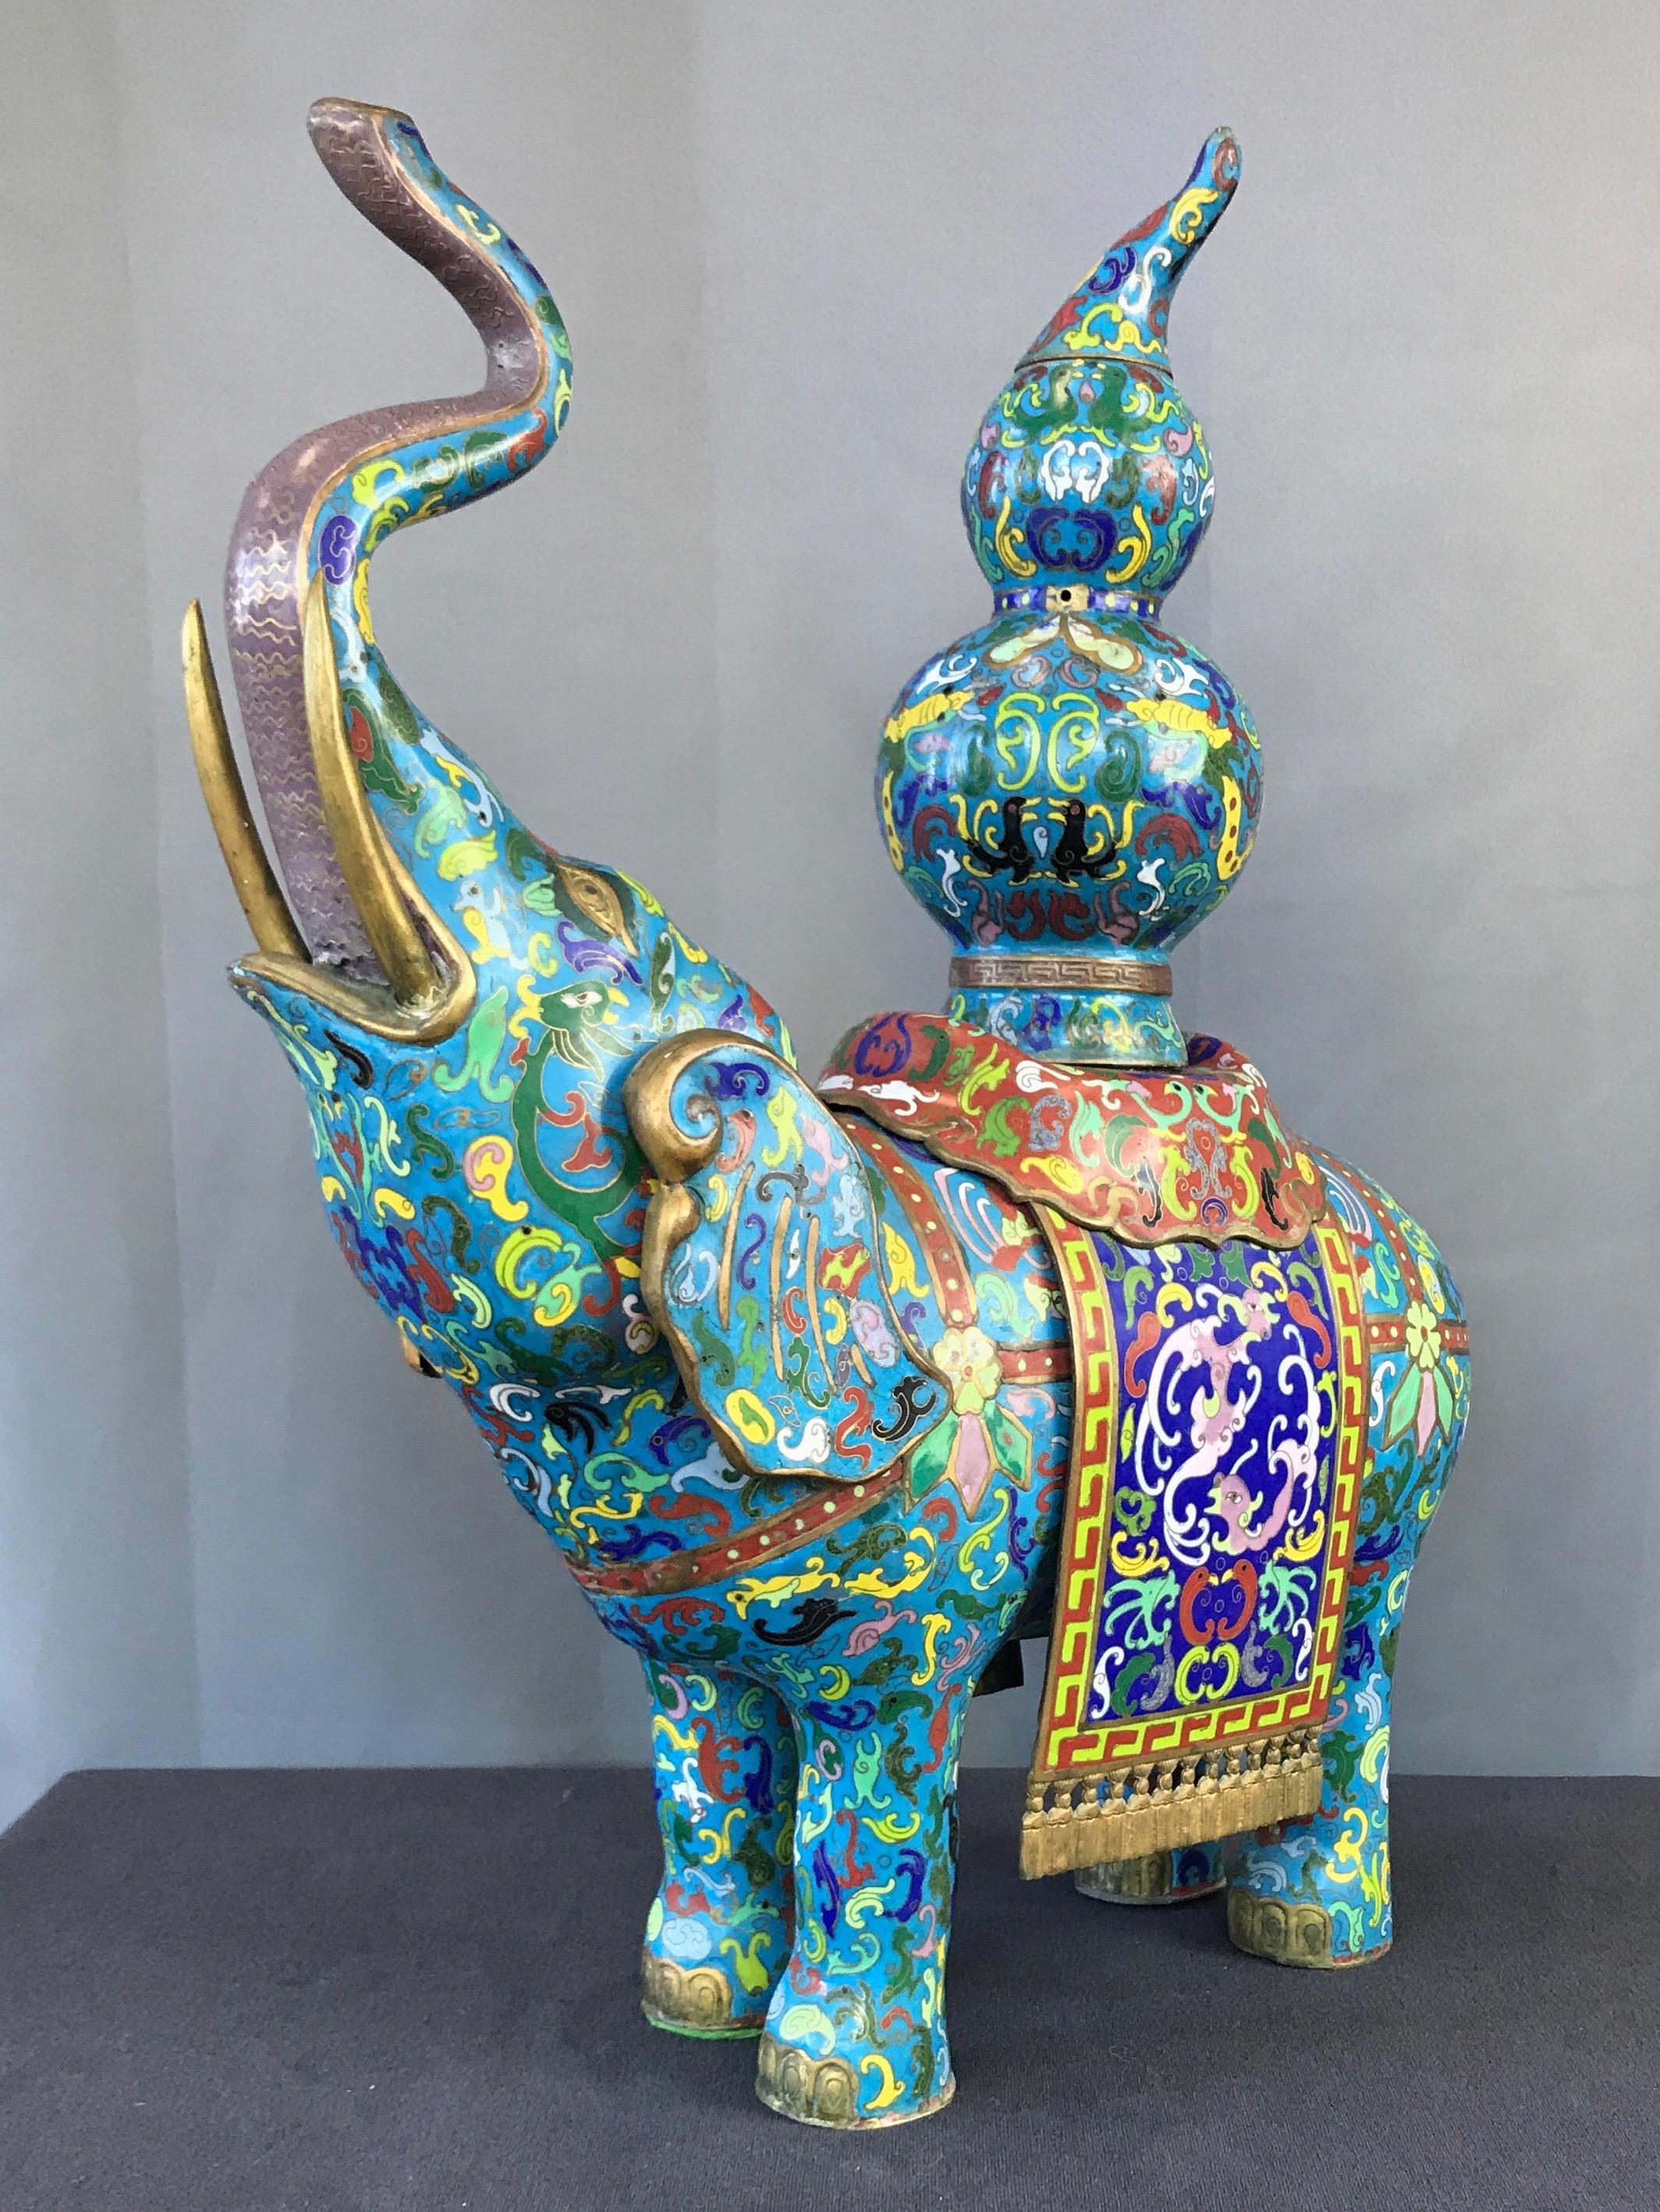 A large and colorful Chinese brass & copper cloisonné elephant vessel, circa mid-20th century.

Elephant with proudly raised trunk carries on its back a removable traditional gourd-shaped form with lid, all of which are hollow and pierced by